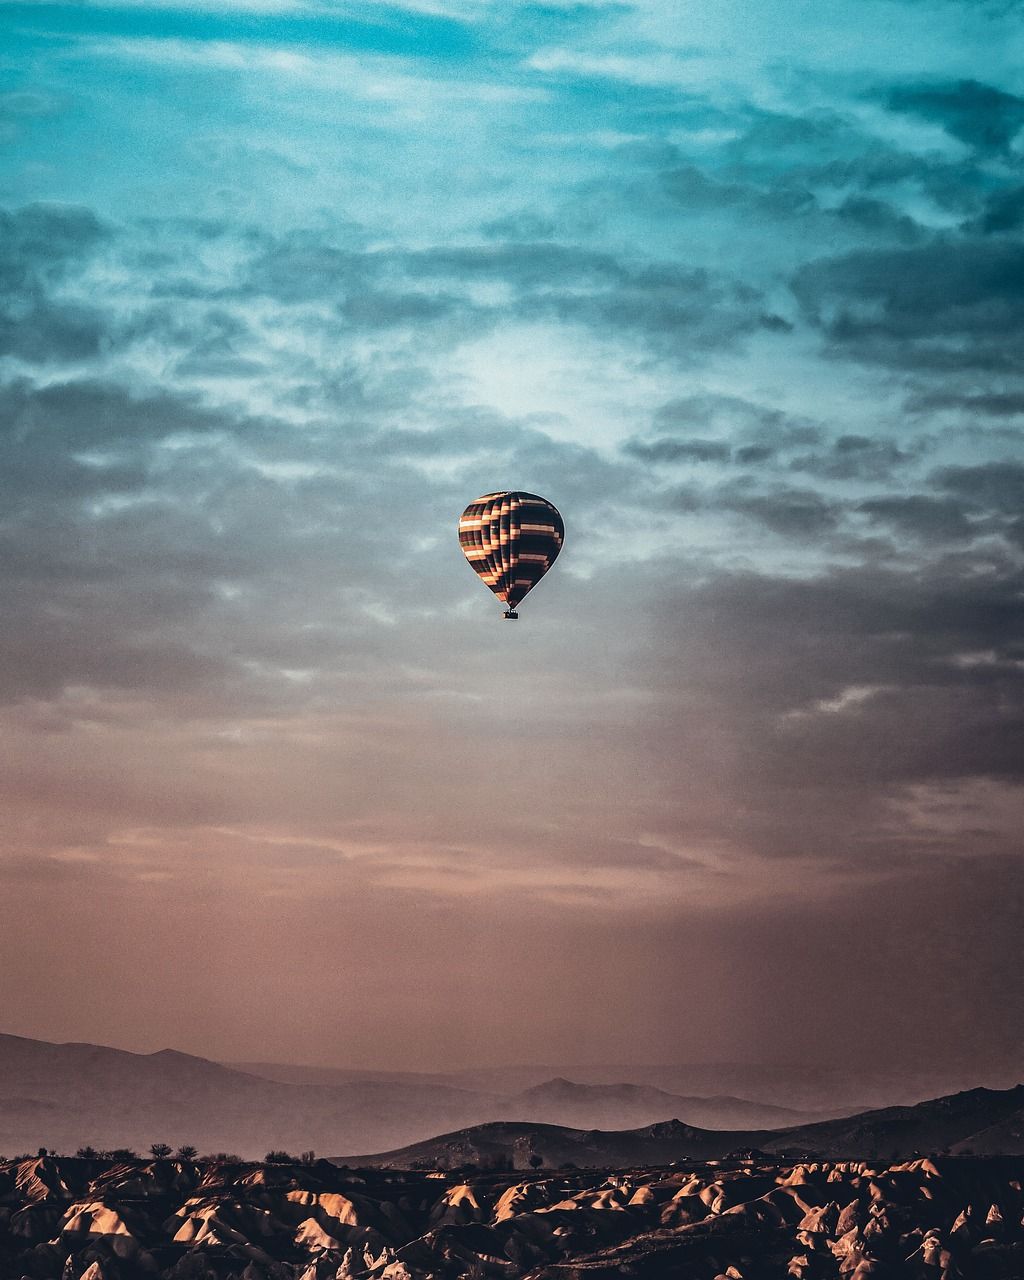 A hot air balloon floating in the sky - Hot air balloons